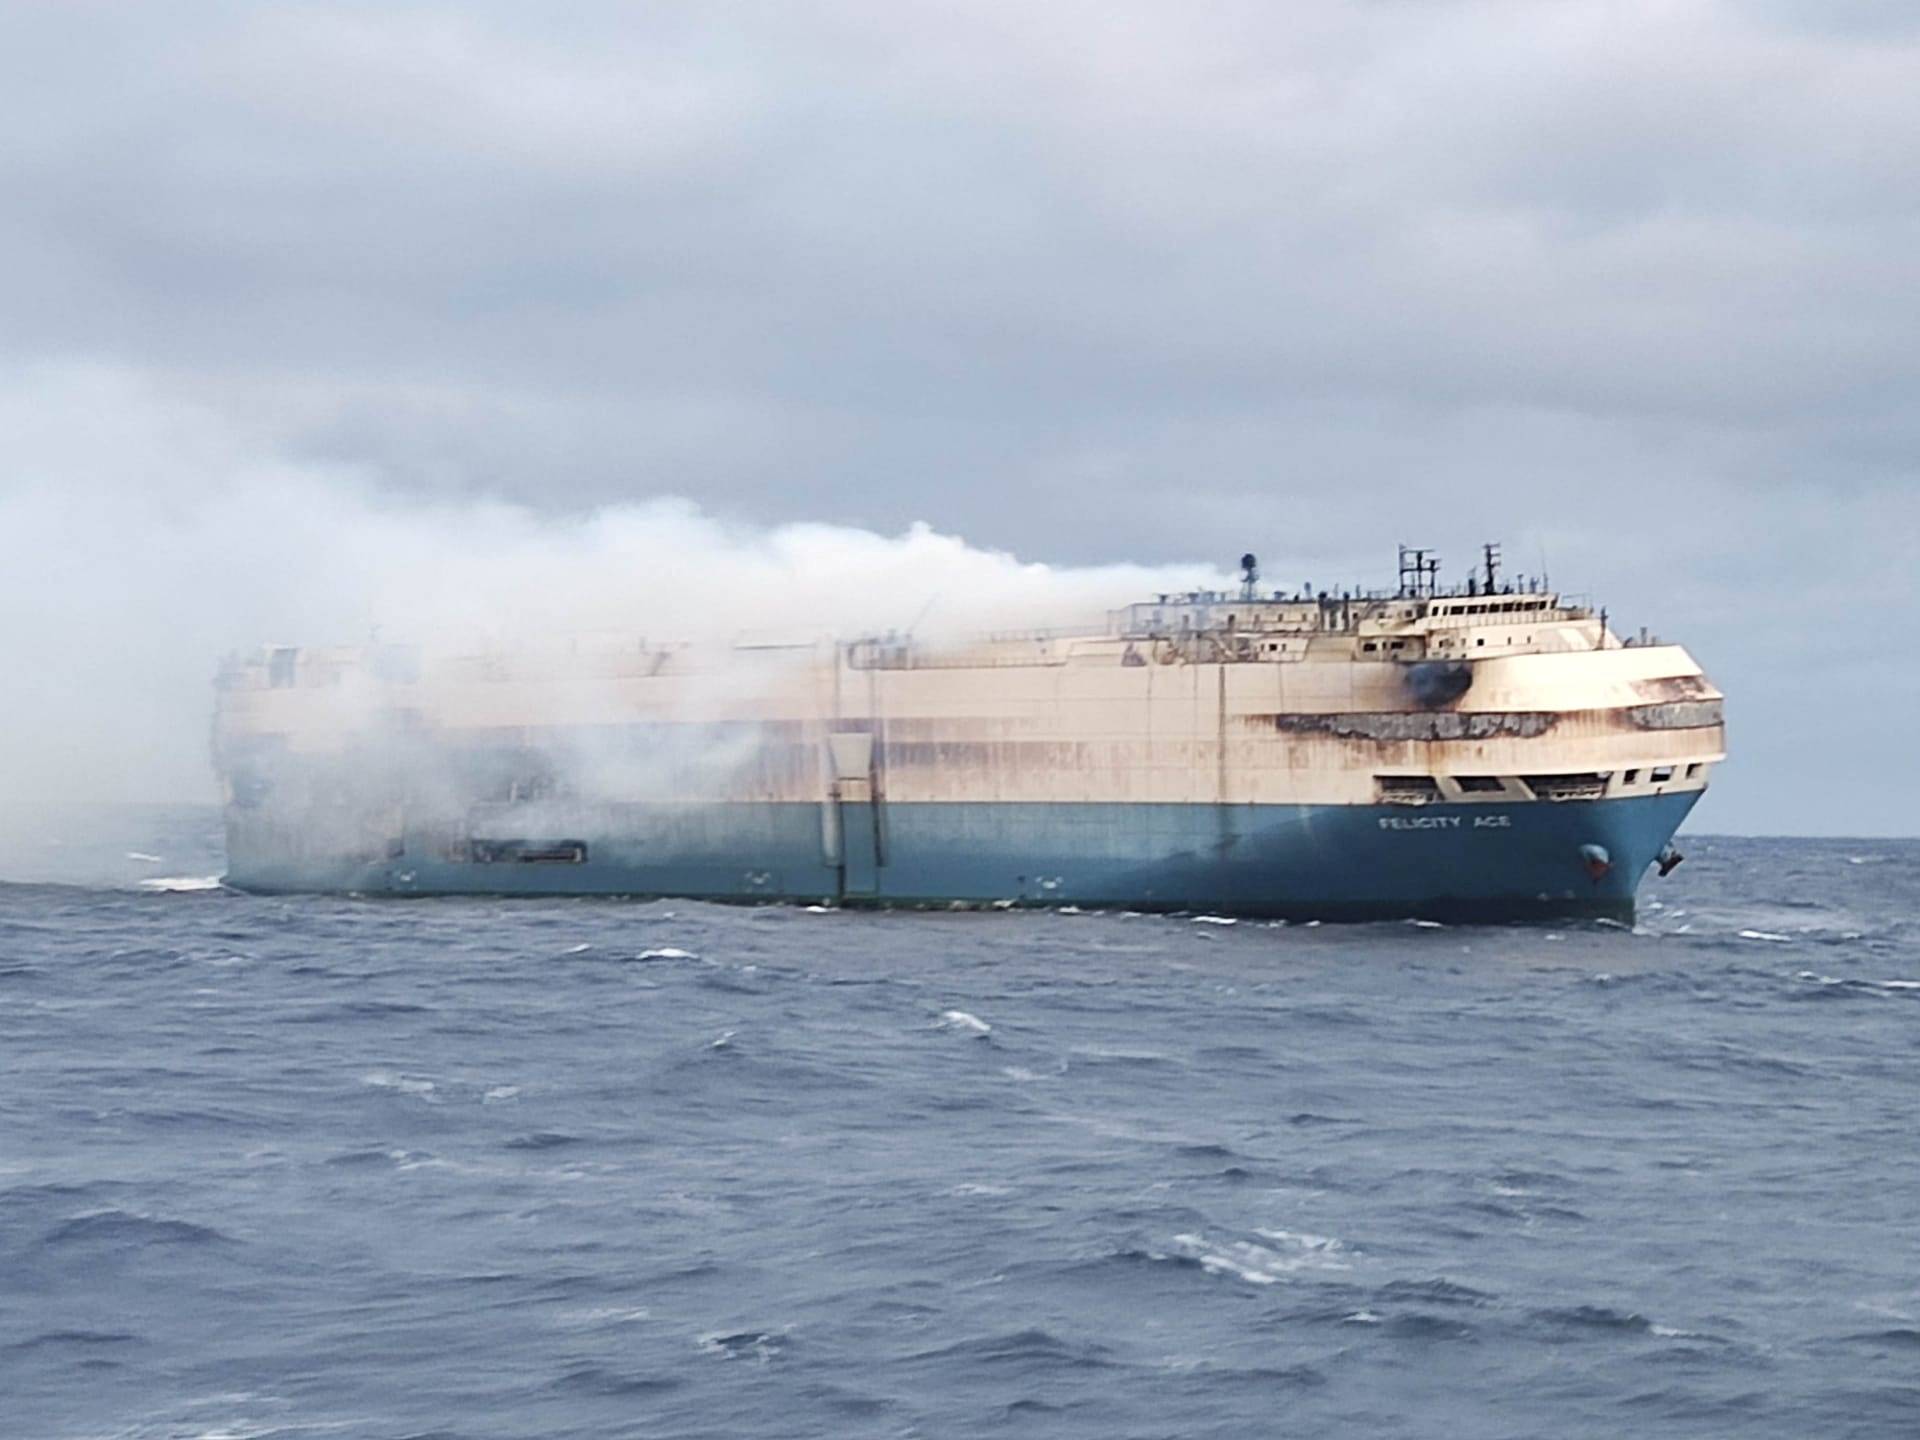 The ship, Felicity Ace, burns off the coast of Portugal's Azores islands on Friday.  | PORTUGUESE NAVY / VIA REUTERS 